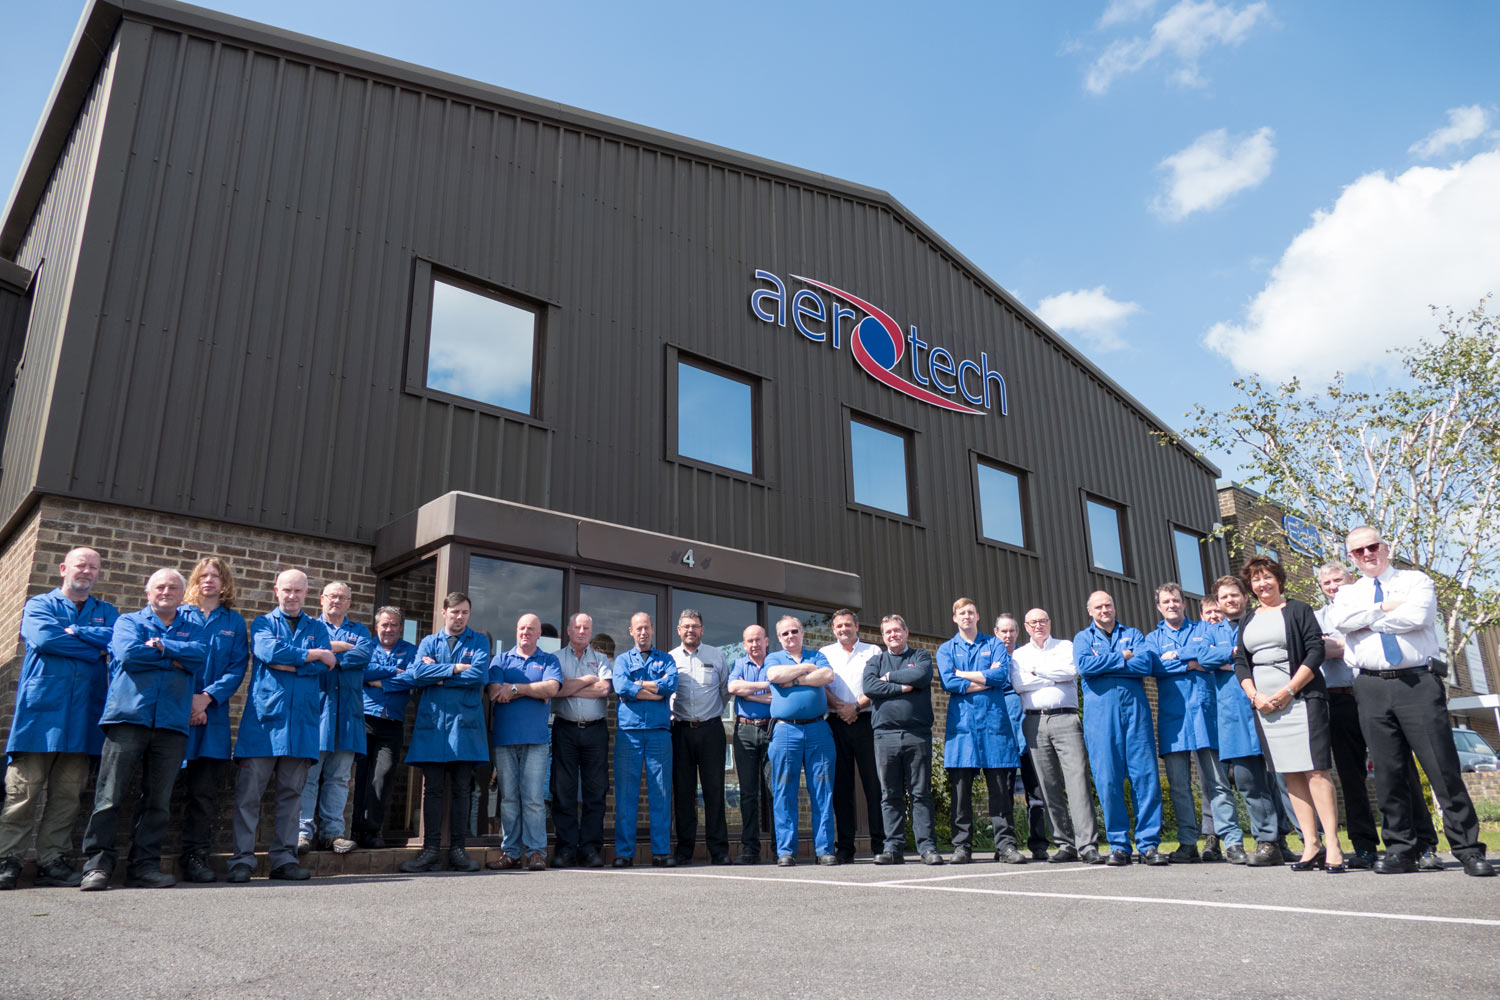 aerotech-group-workers-outside-image-by-aerotech-precision